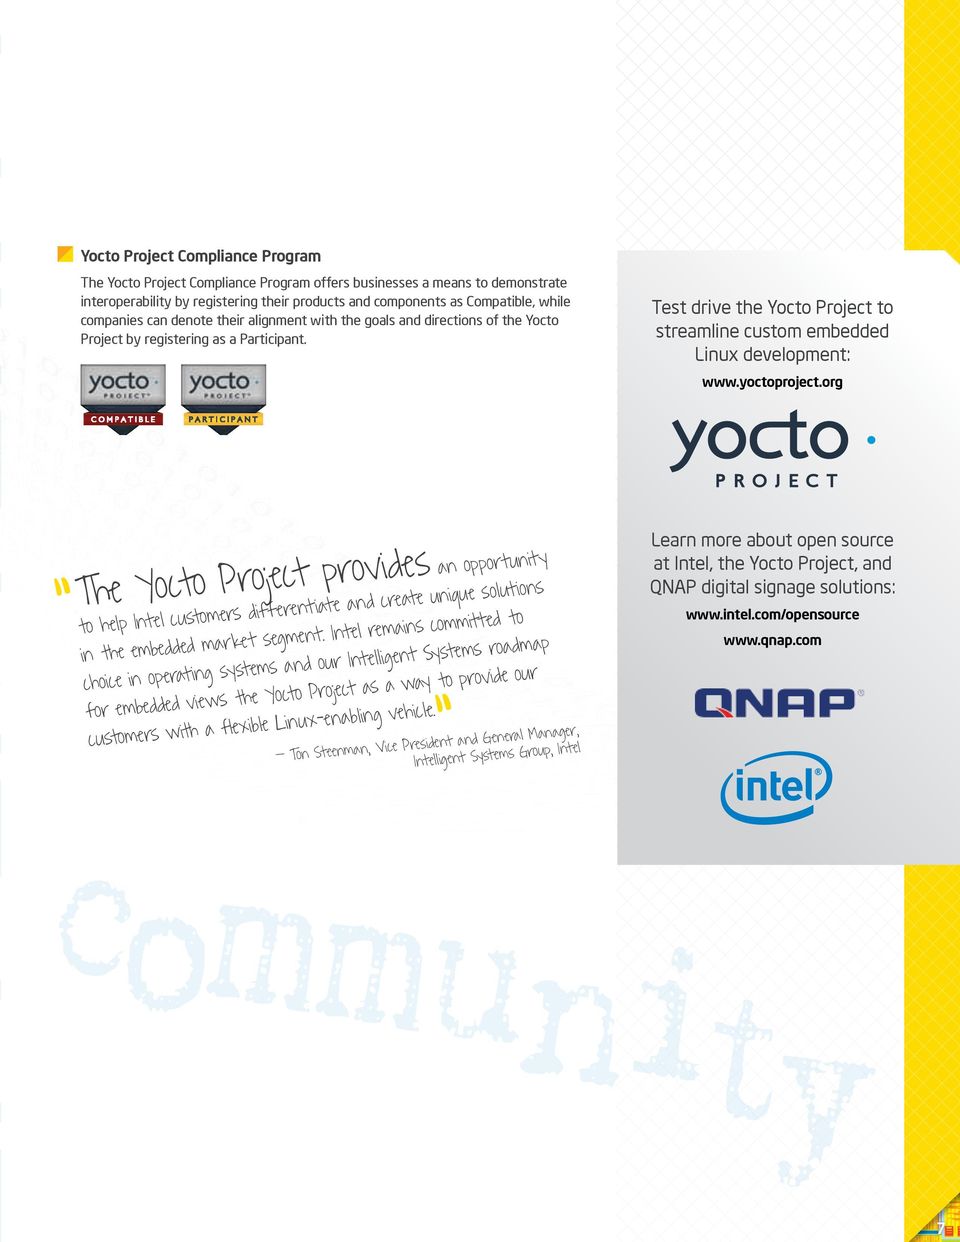 Test drive the Yocto Project to streamline custom embedded Linux development: www.yoctoproject.